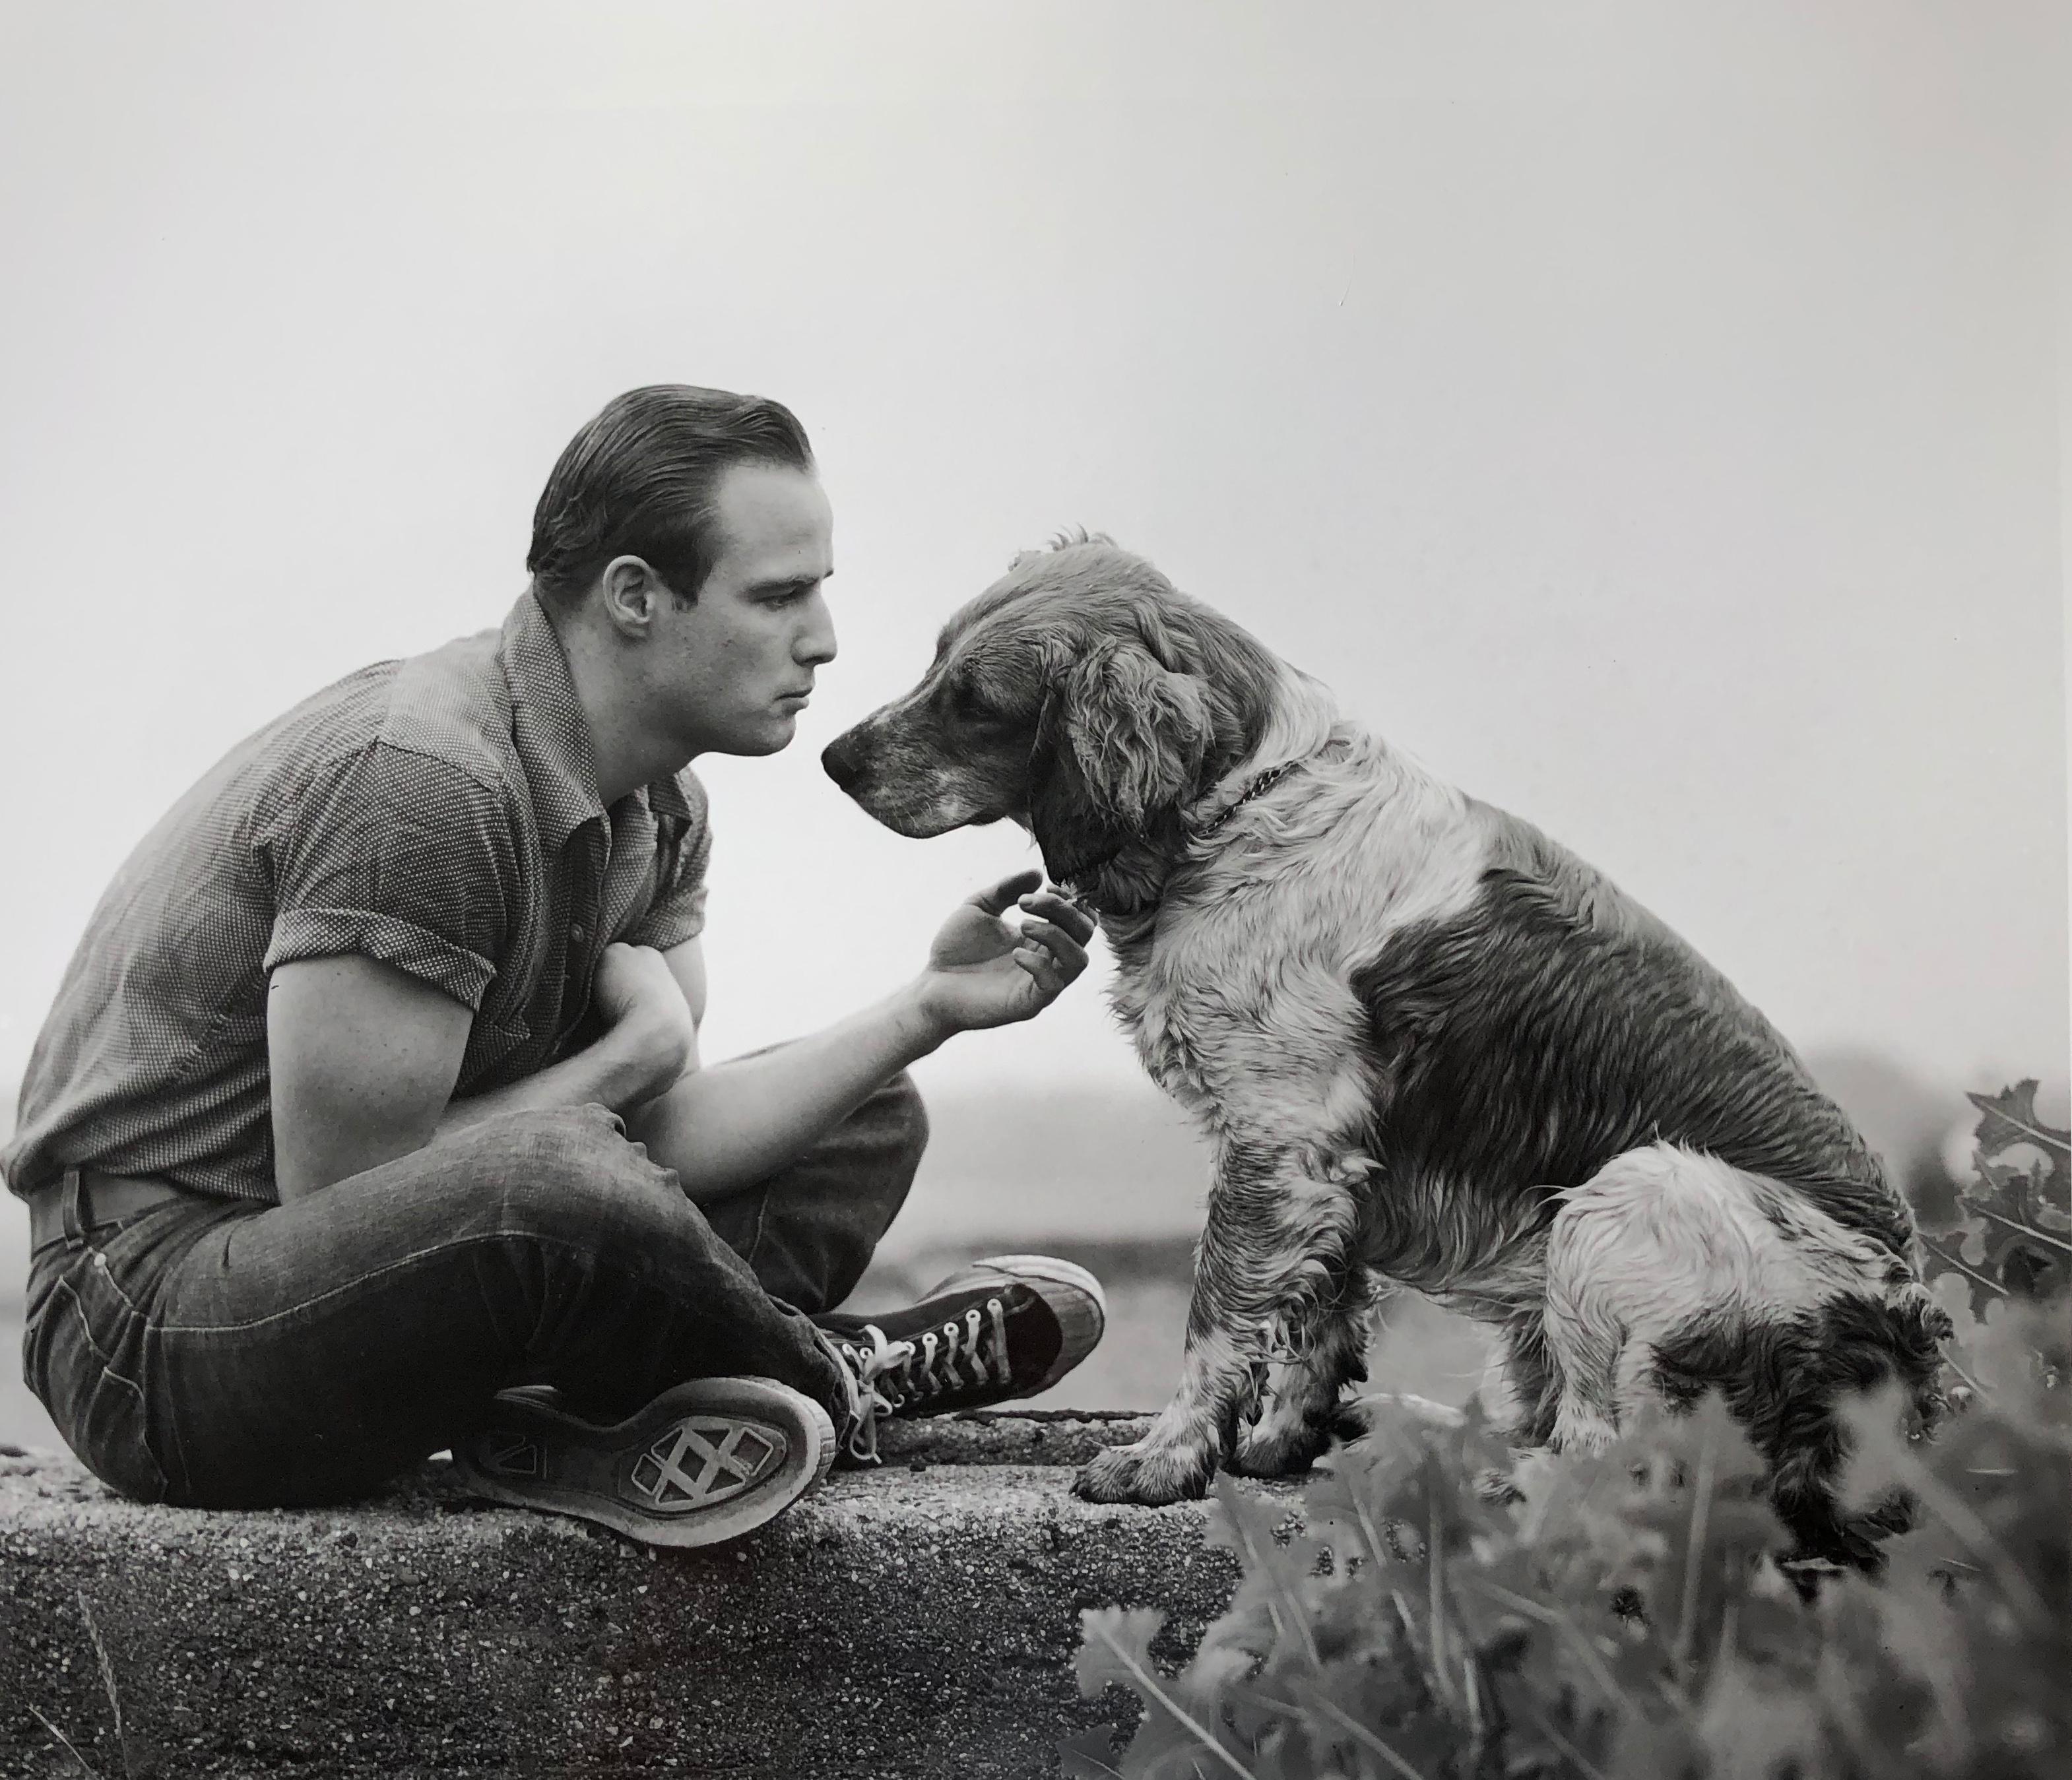 On assignment for Life Magazine in 1950, Art Shay photographed Marlon Brando at his family farm in Libertyville, Illinois, just north of Chicago.  Innocent of the fame to come, the young Brando shows his softer side, affectionately engaging the